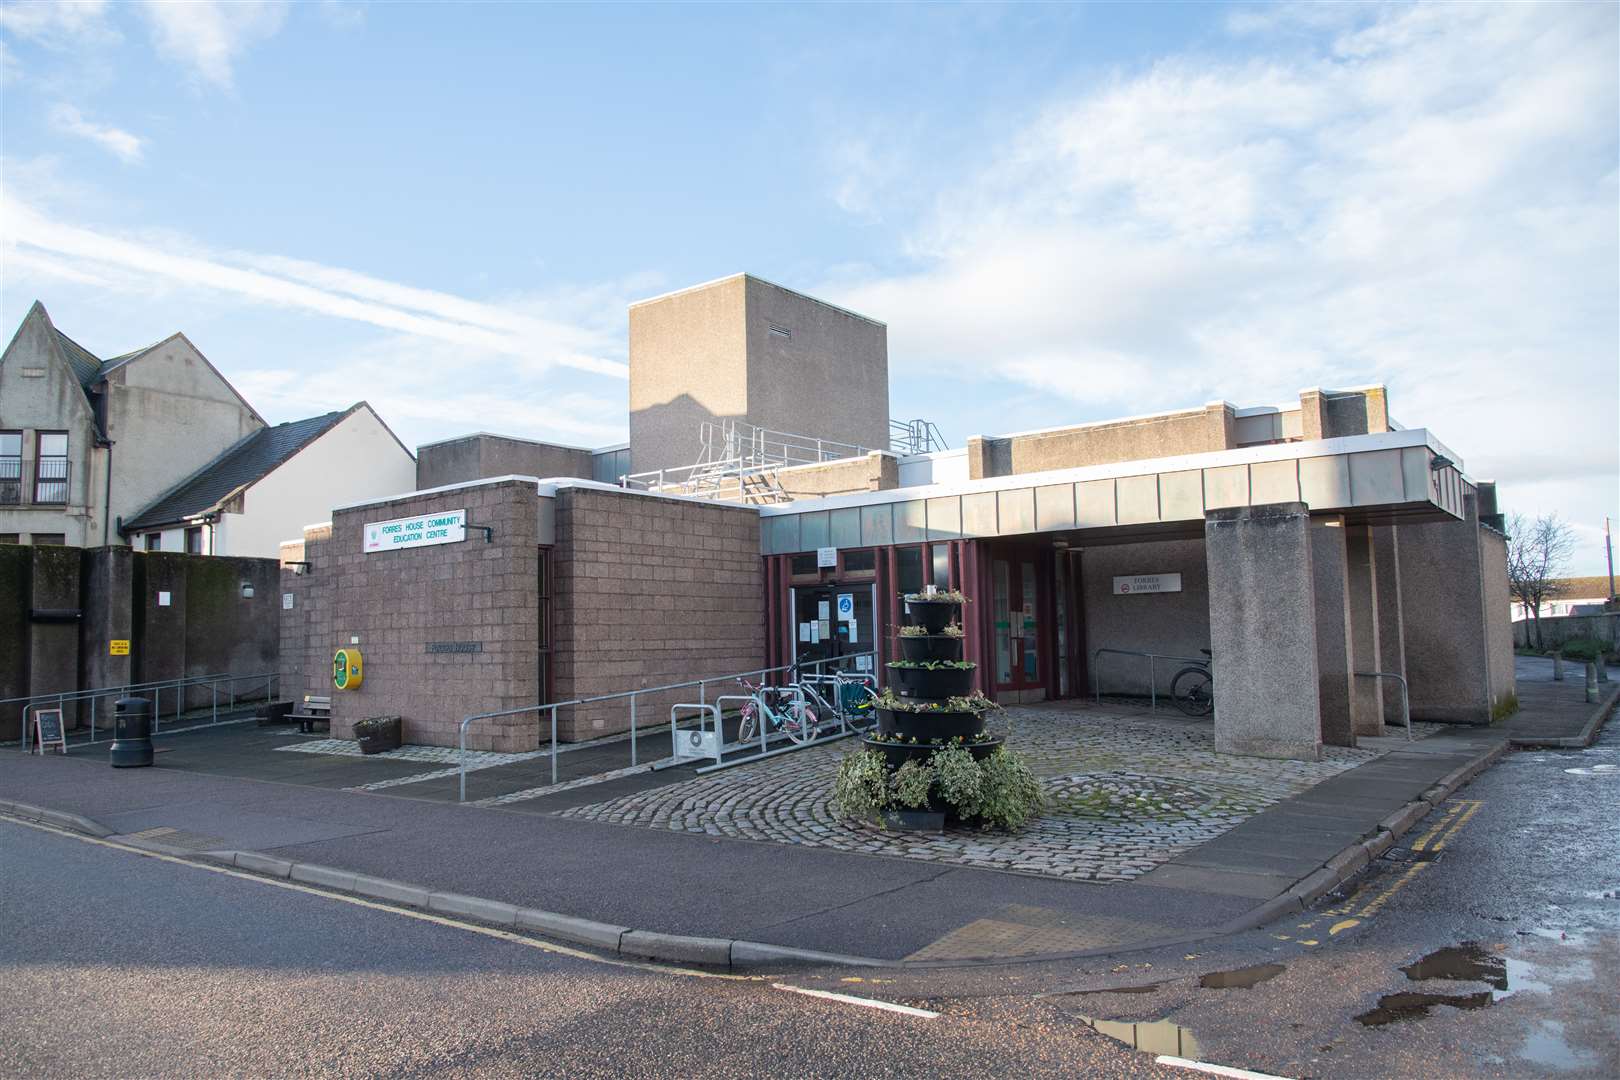 Forres House Community Centre, which hosts Forres Library...Picture: Daniel Forsyth